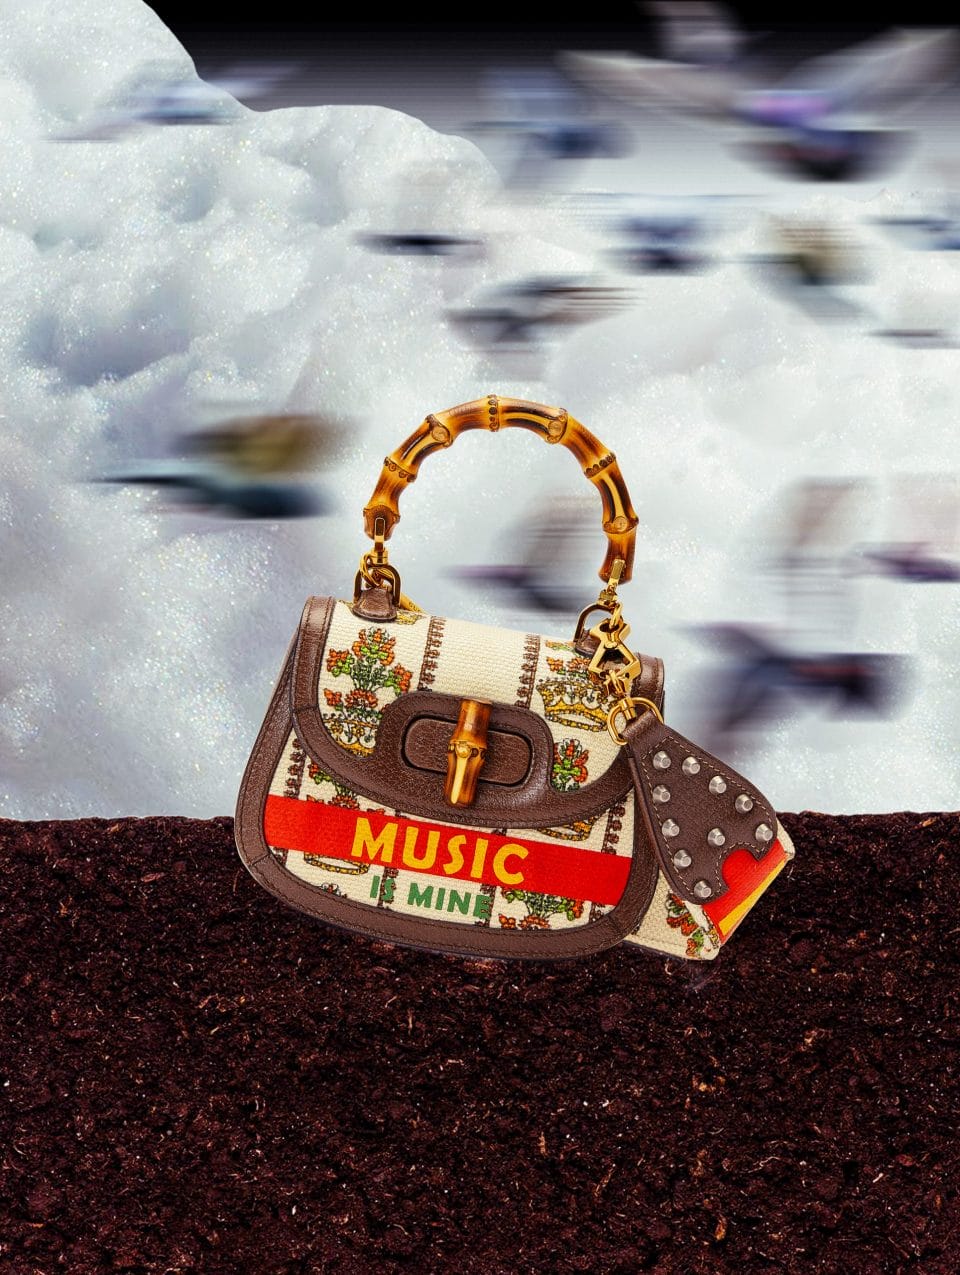 The Maximalist Menswear Bags Of the Season Hum To the Circuits of Disobedience